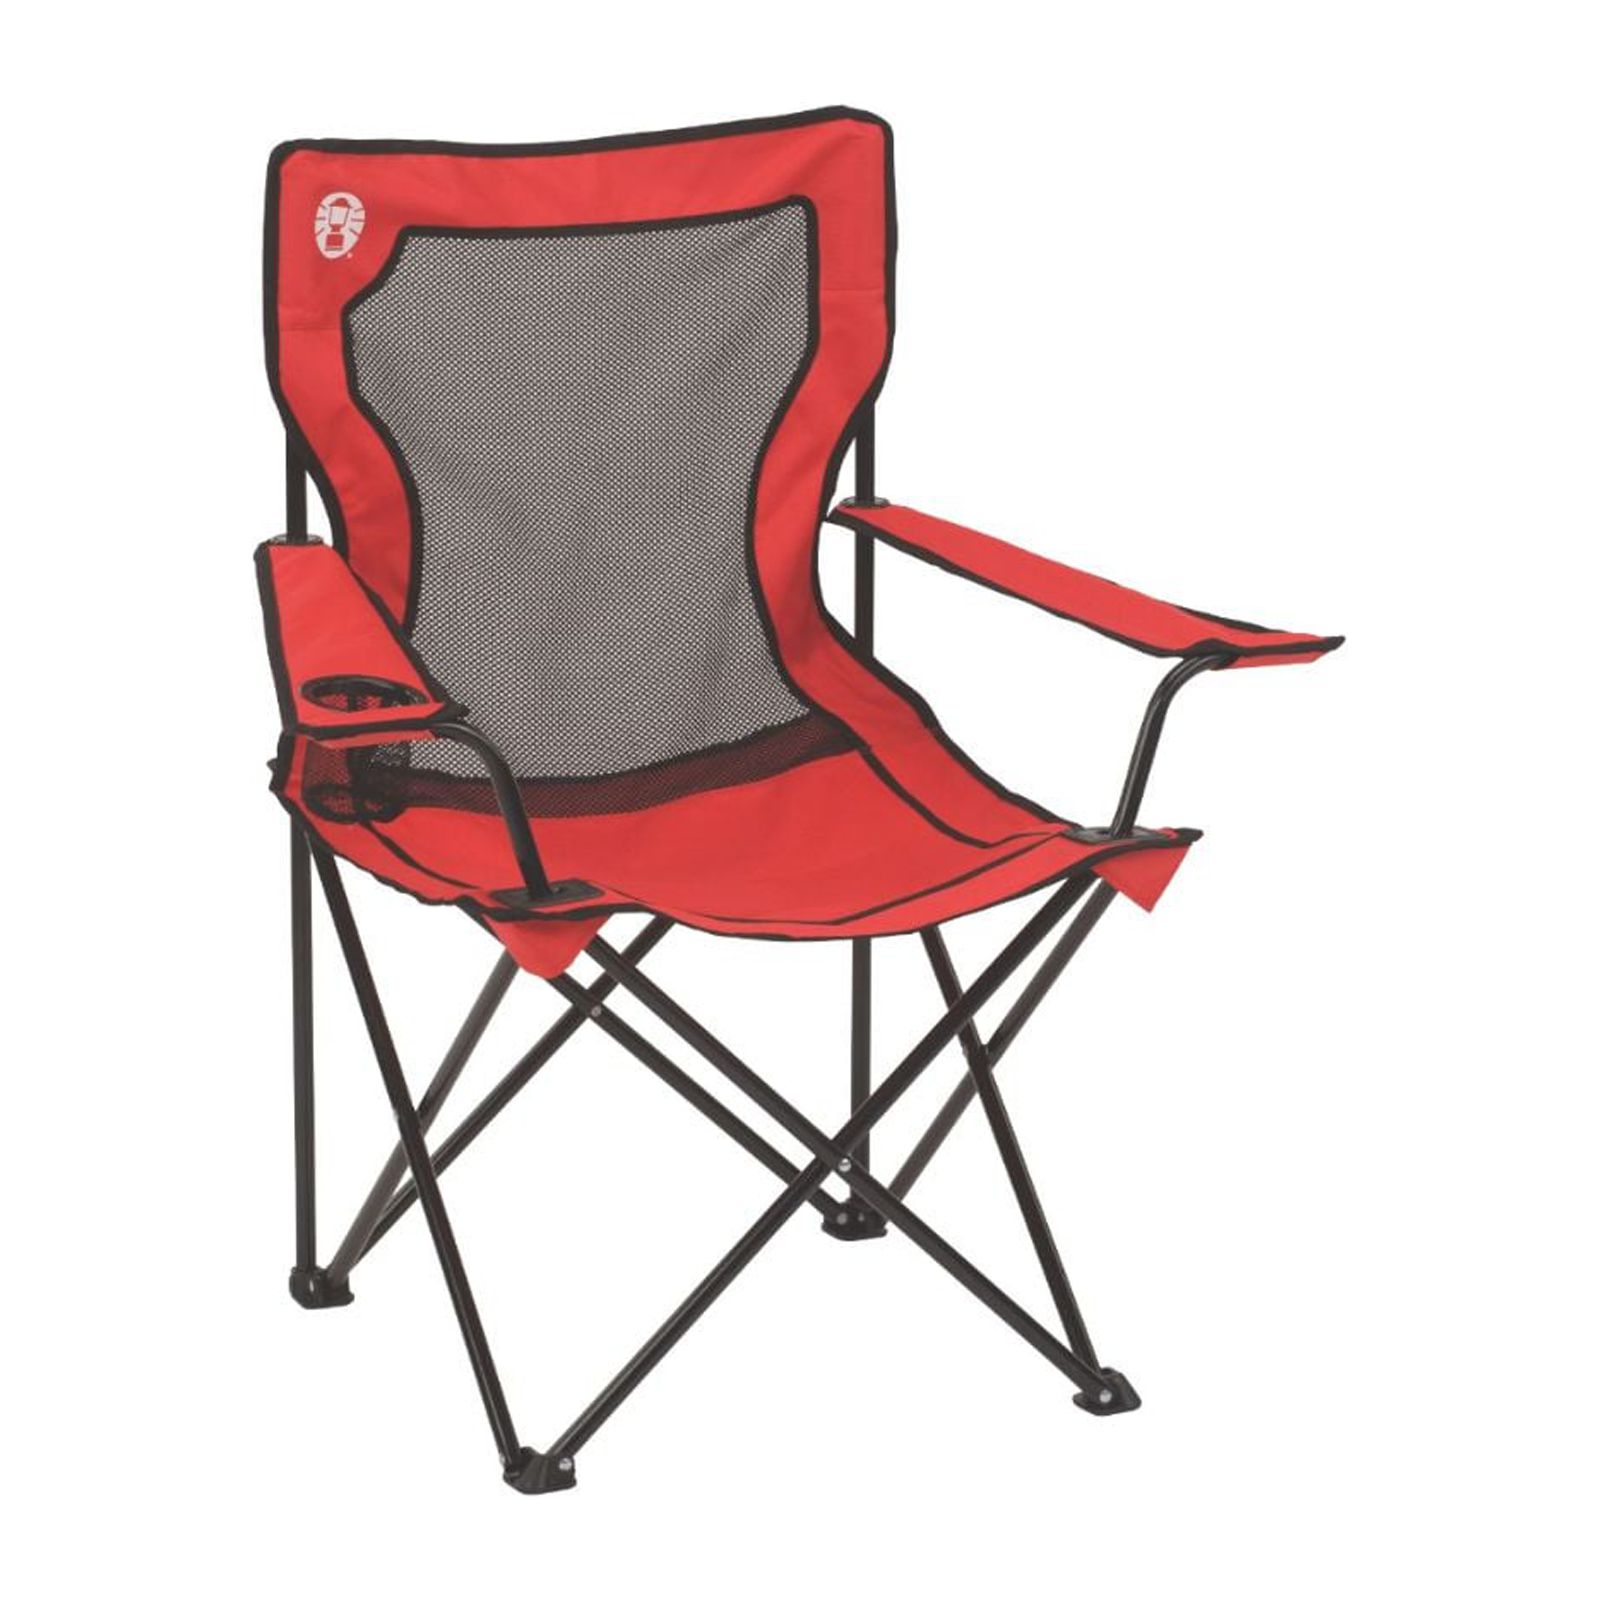 Coleman Broadband Mesh Quad Adult Camping Chair, Red - image 1 of 5